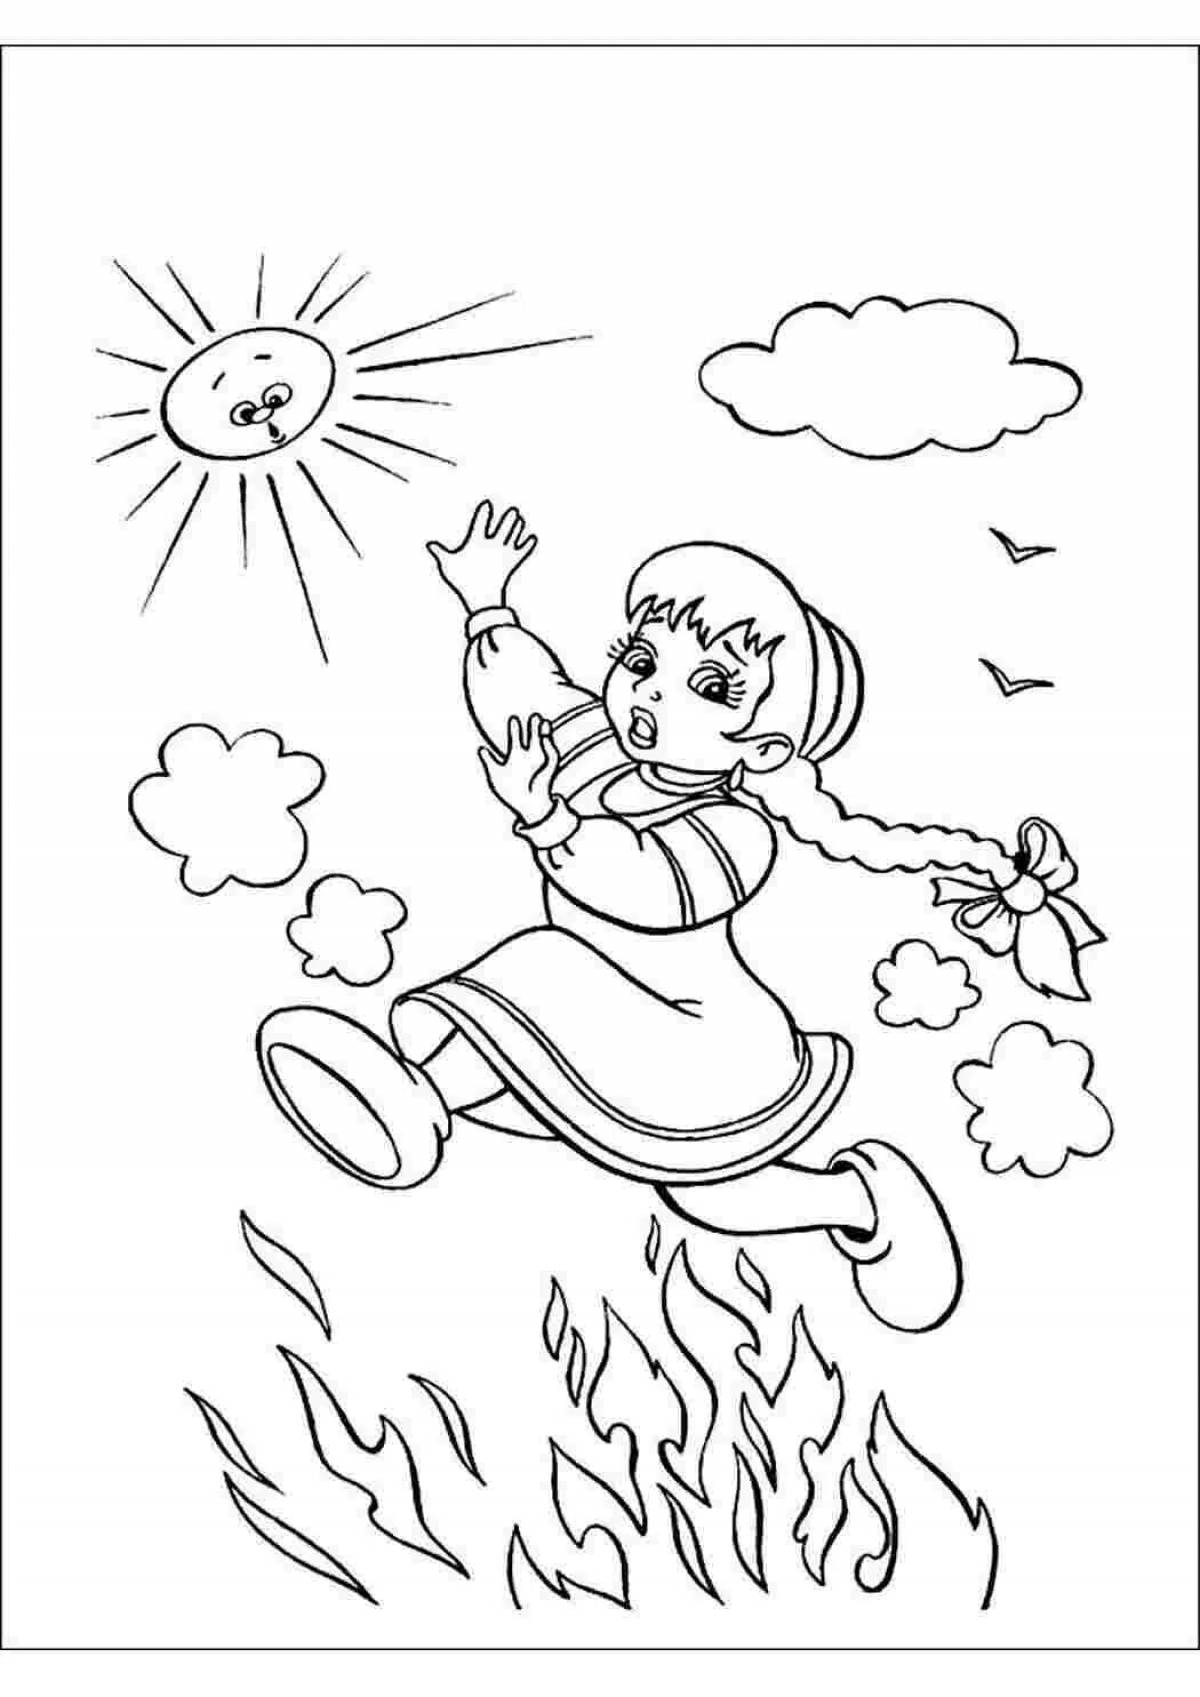 Glowing jumping fire coloring page for kids